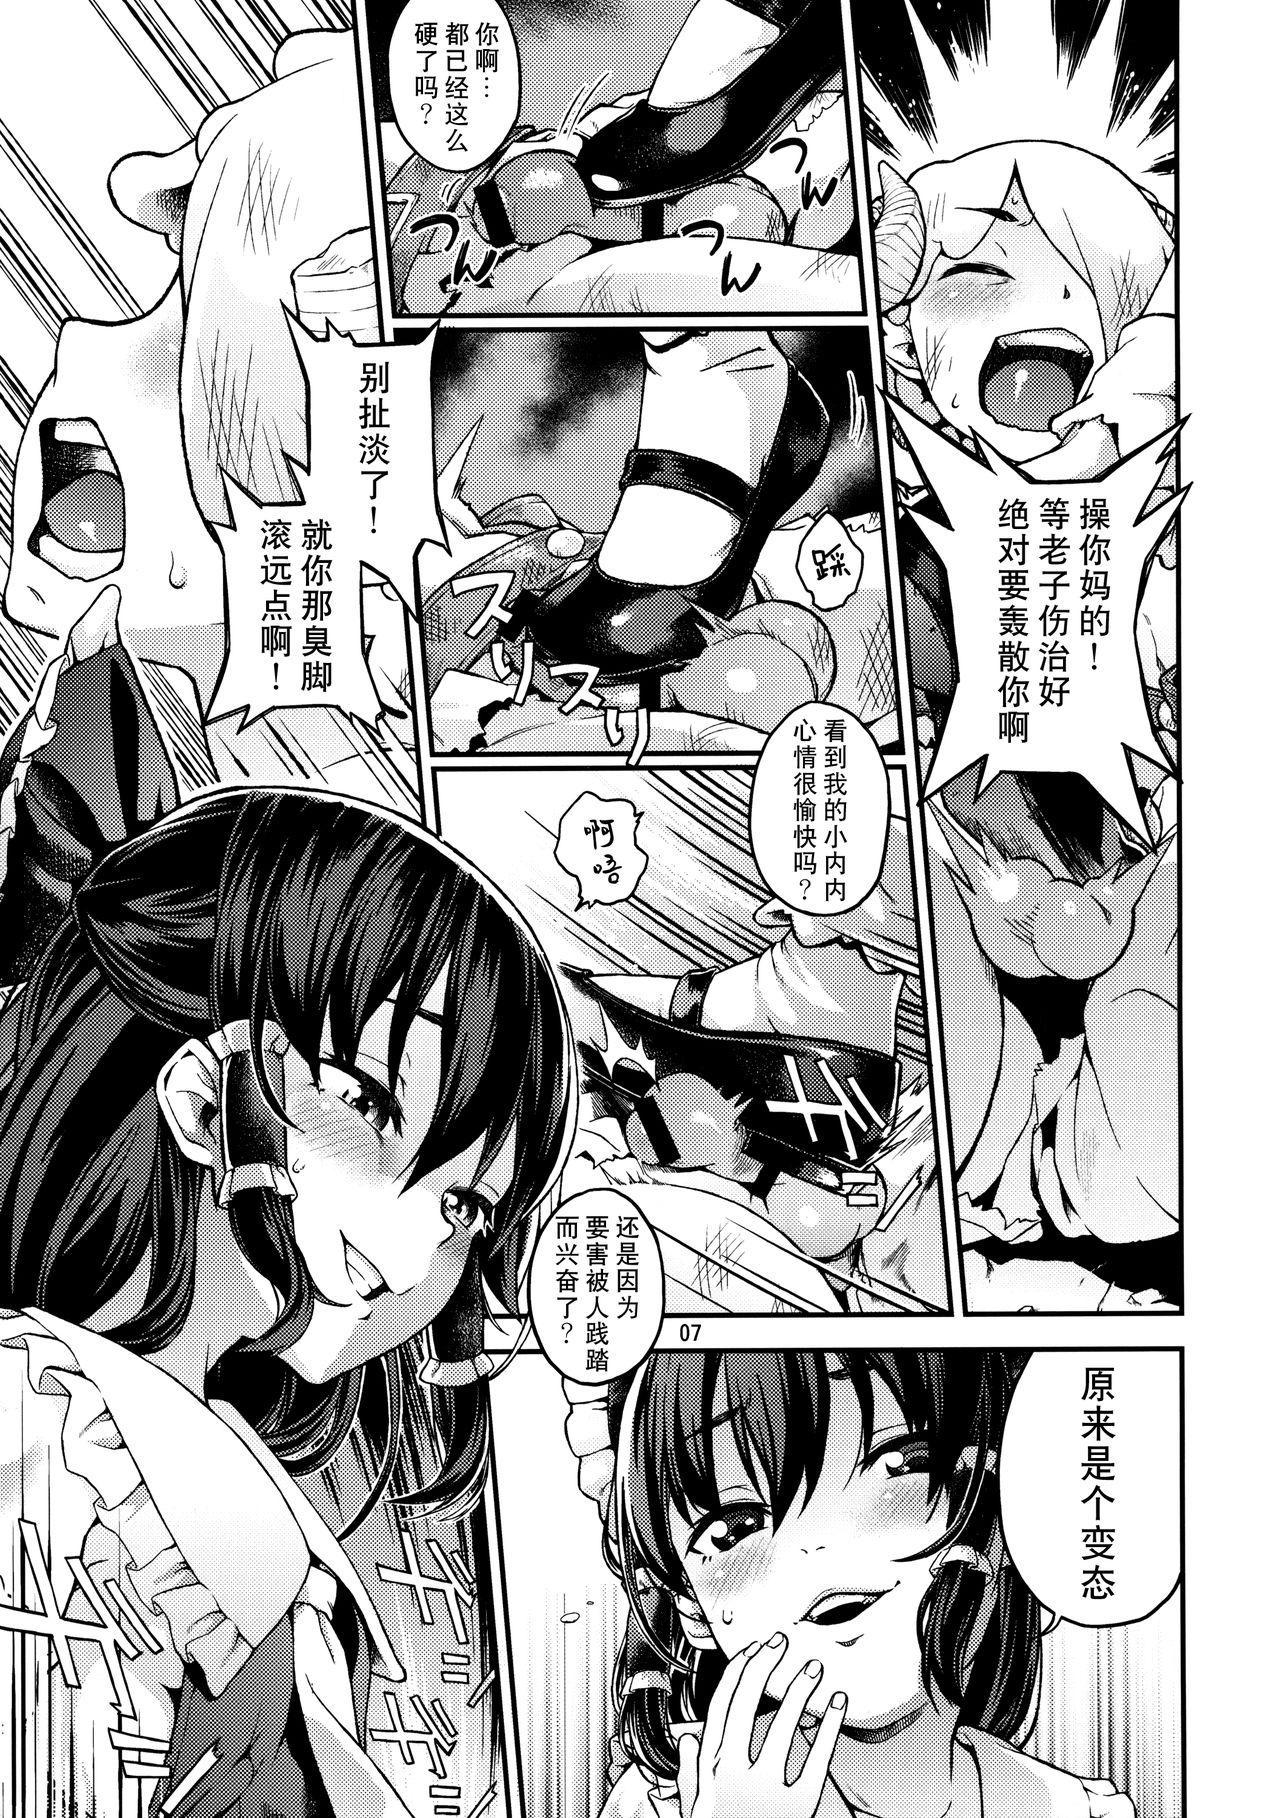 Leather Gensoukyou no H na Himitsu - Touhou project Gay Physicals - Page 6